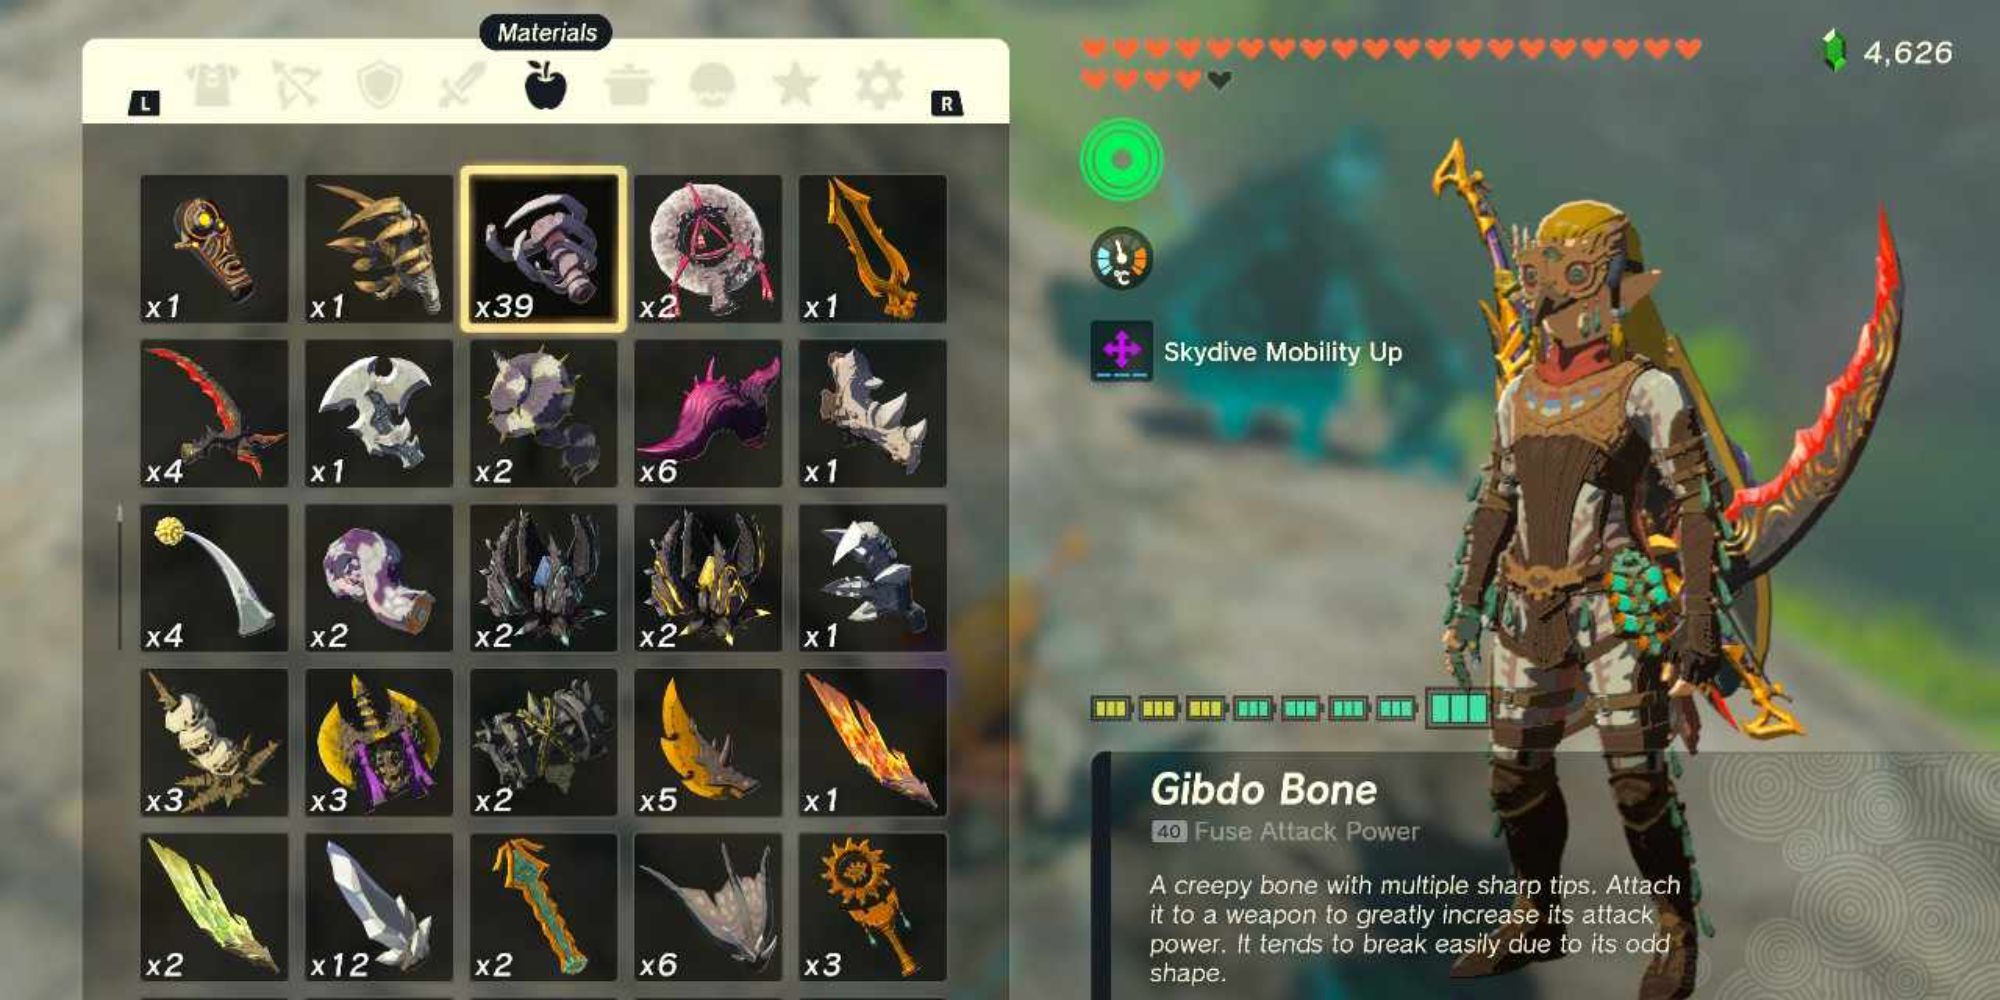 Link from Tears of the Kingdom stood beside his inventory, which is showing a Gibdo Bone